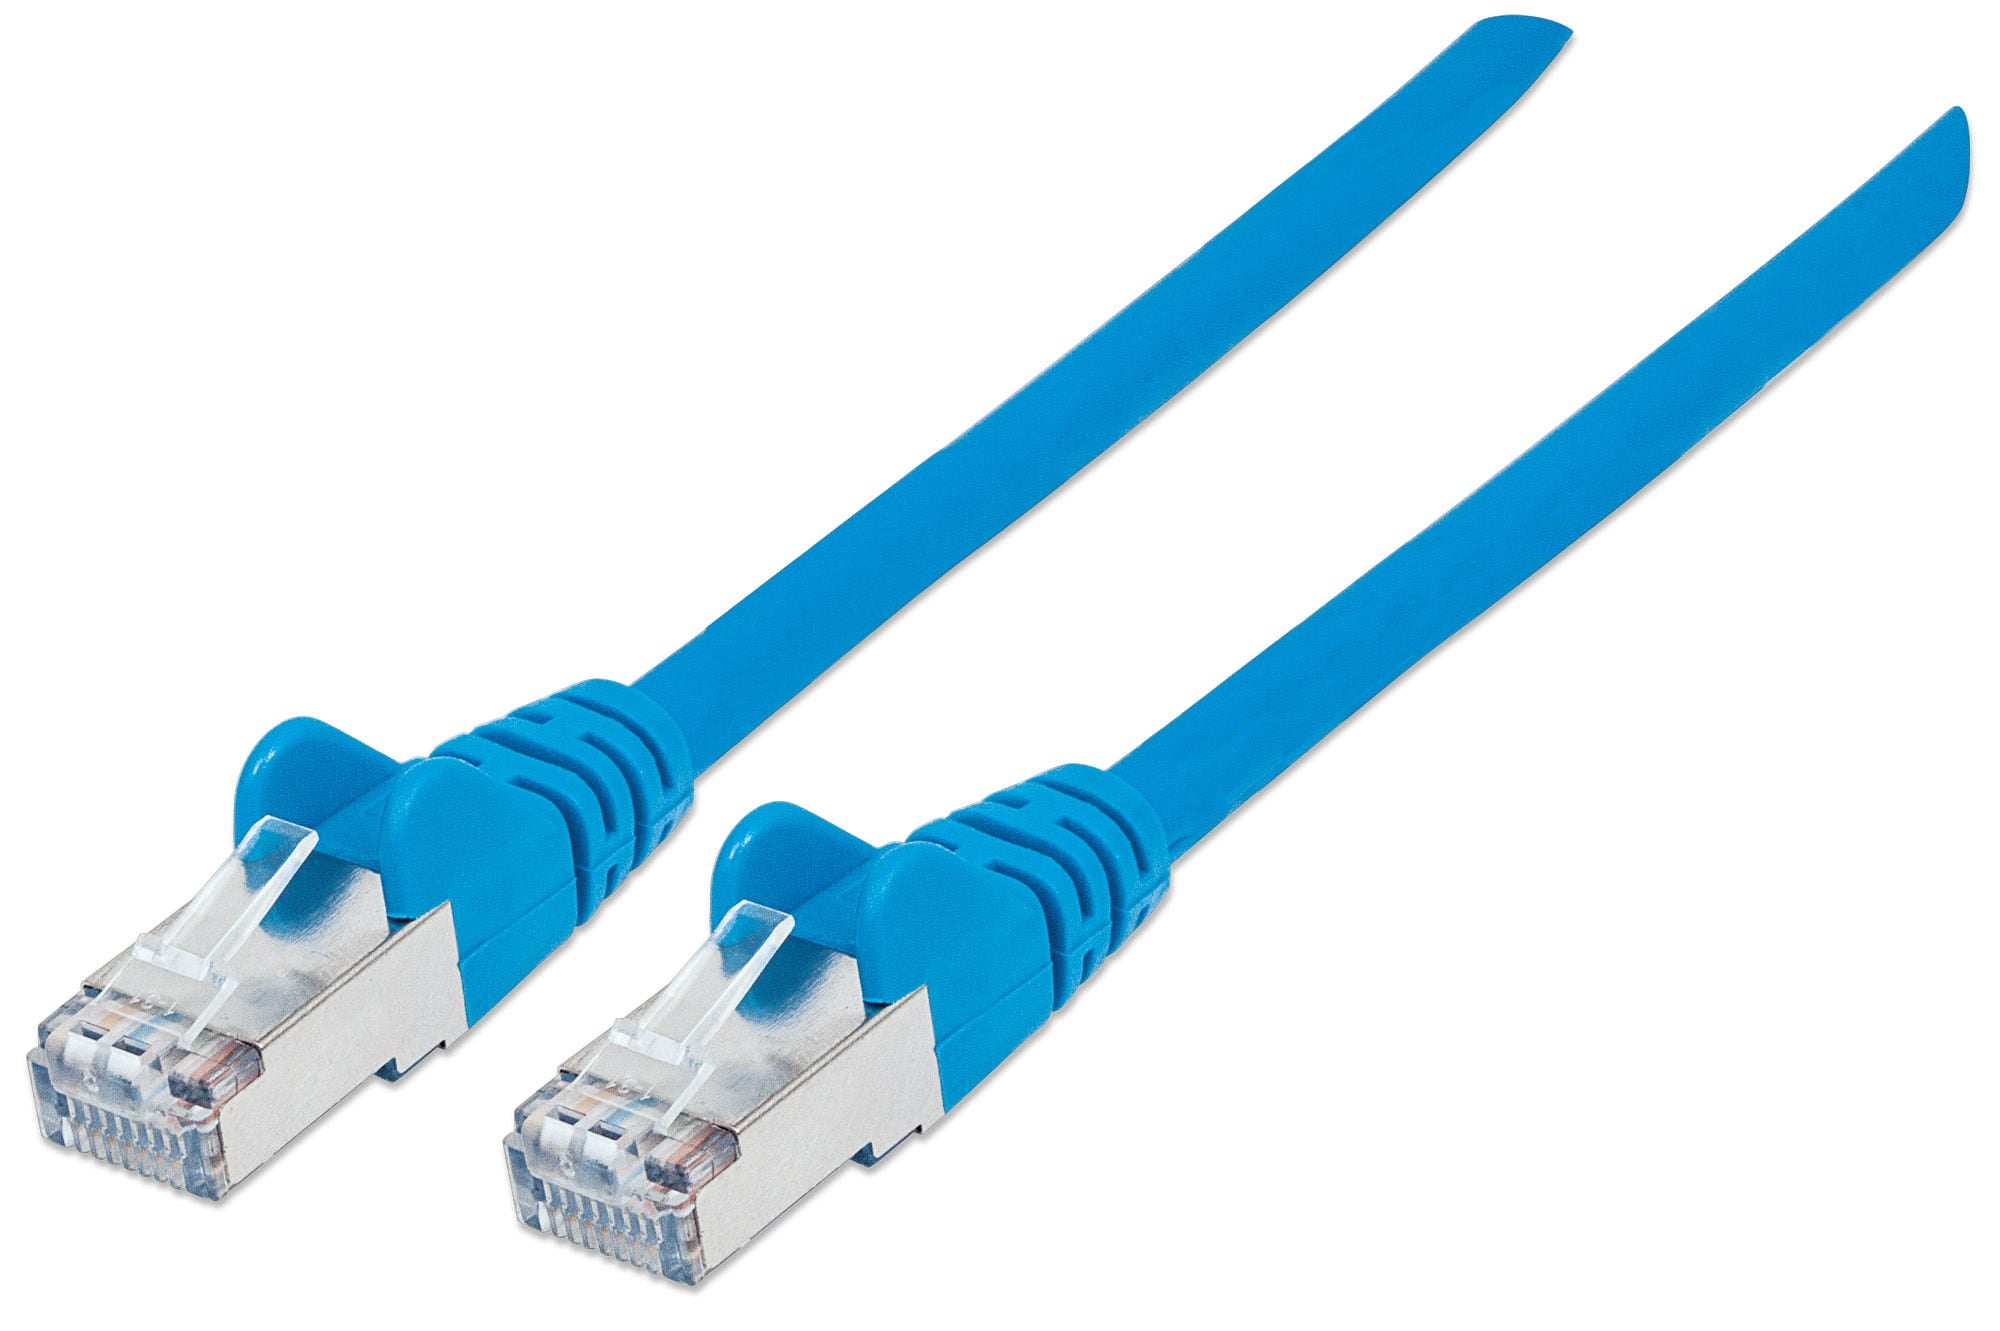 Intellinet Network Patch Cable, Cat6, 1m, Blue, Copper, S/FTP, LSOH / LSZH, PVC, RJ45, Gold Plated Contacts, Snagless, Booted, Lifetime Warranty, Polybag